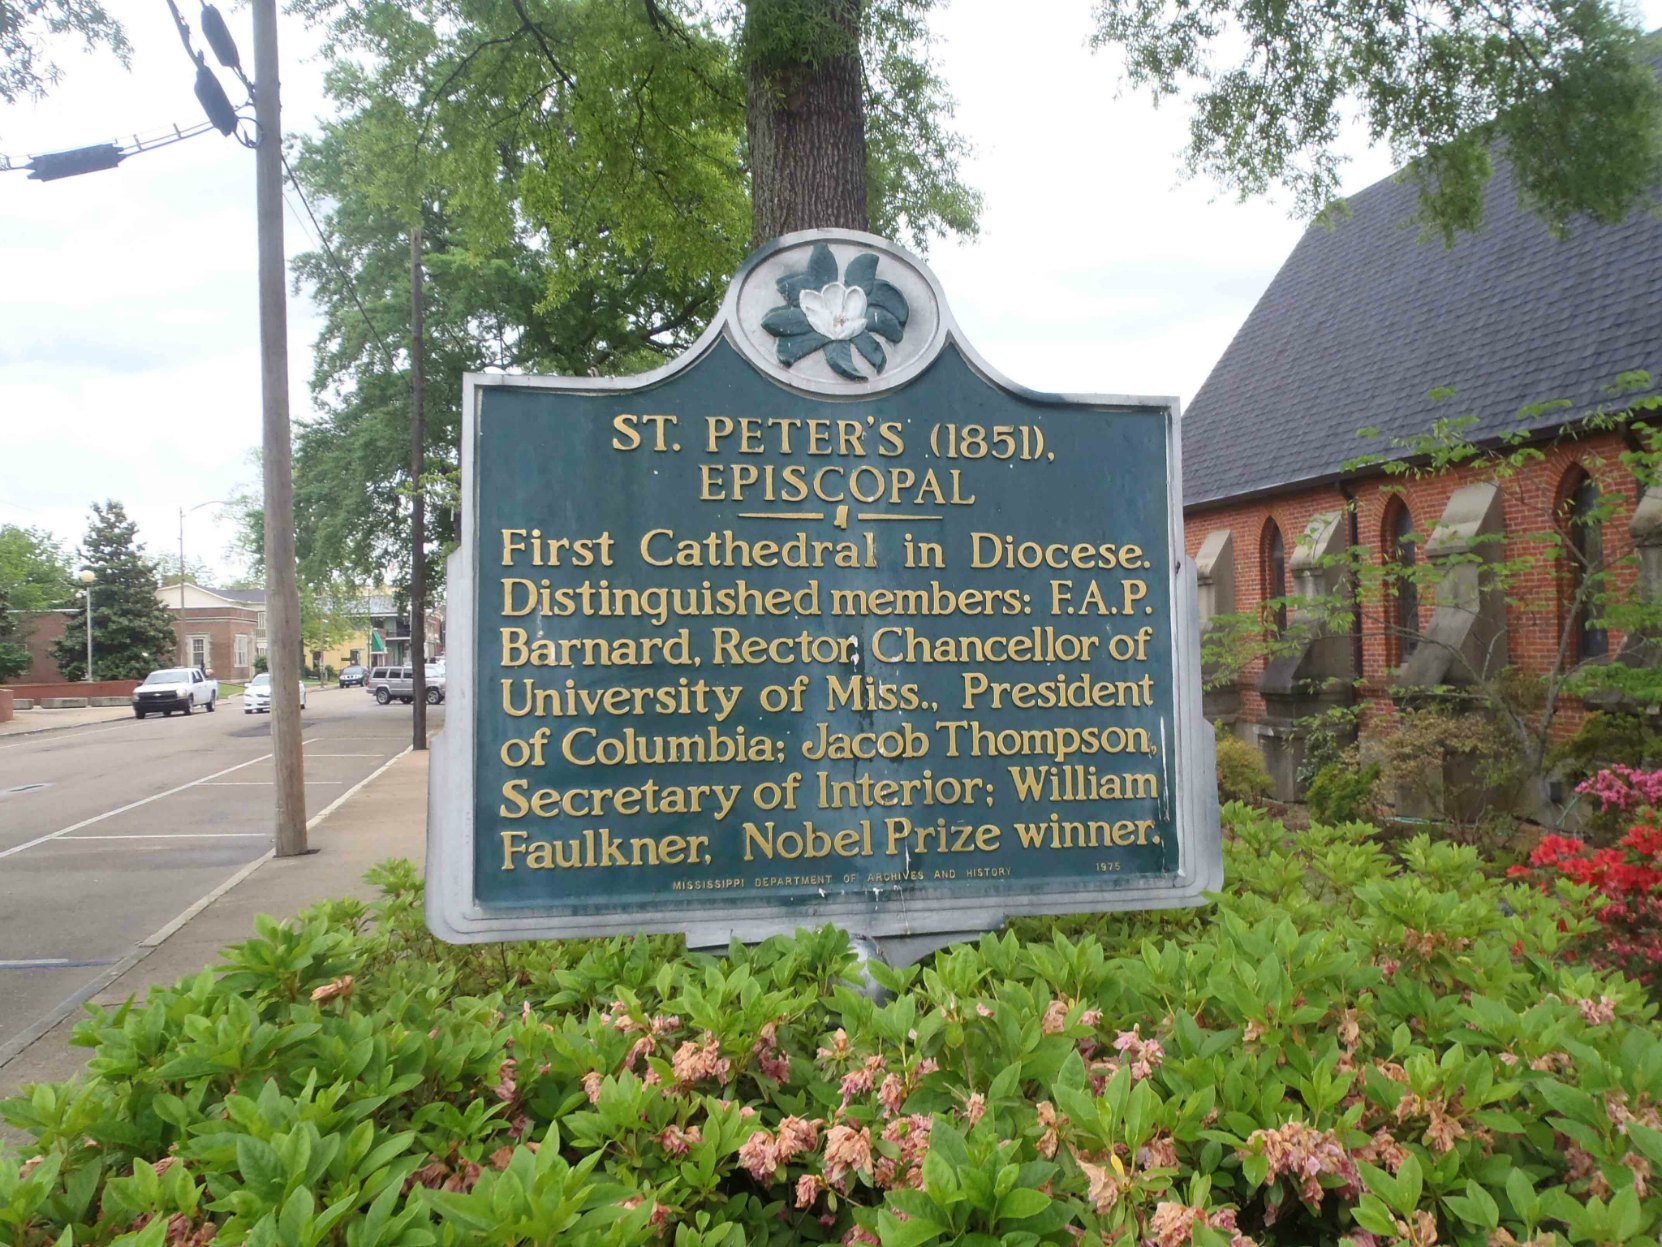 Mississippi Department of Archives & History marker for St. Peter's Episcopal Church, Oxford, Mississippi. William Faulkner was a parishioner of this church.